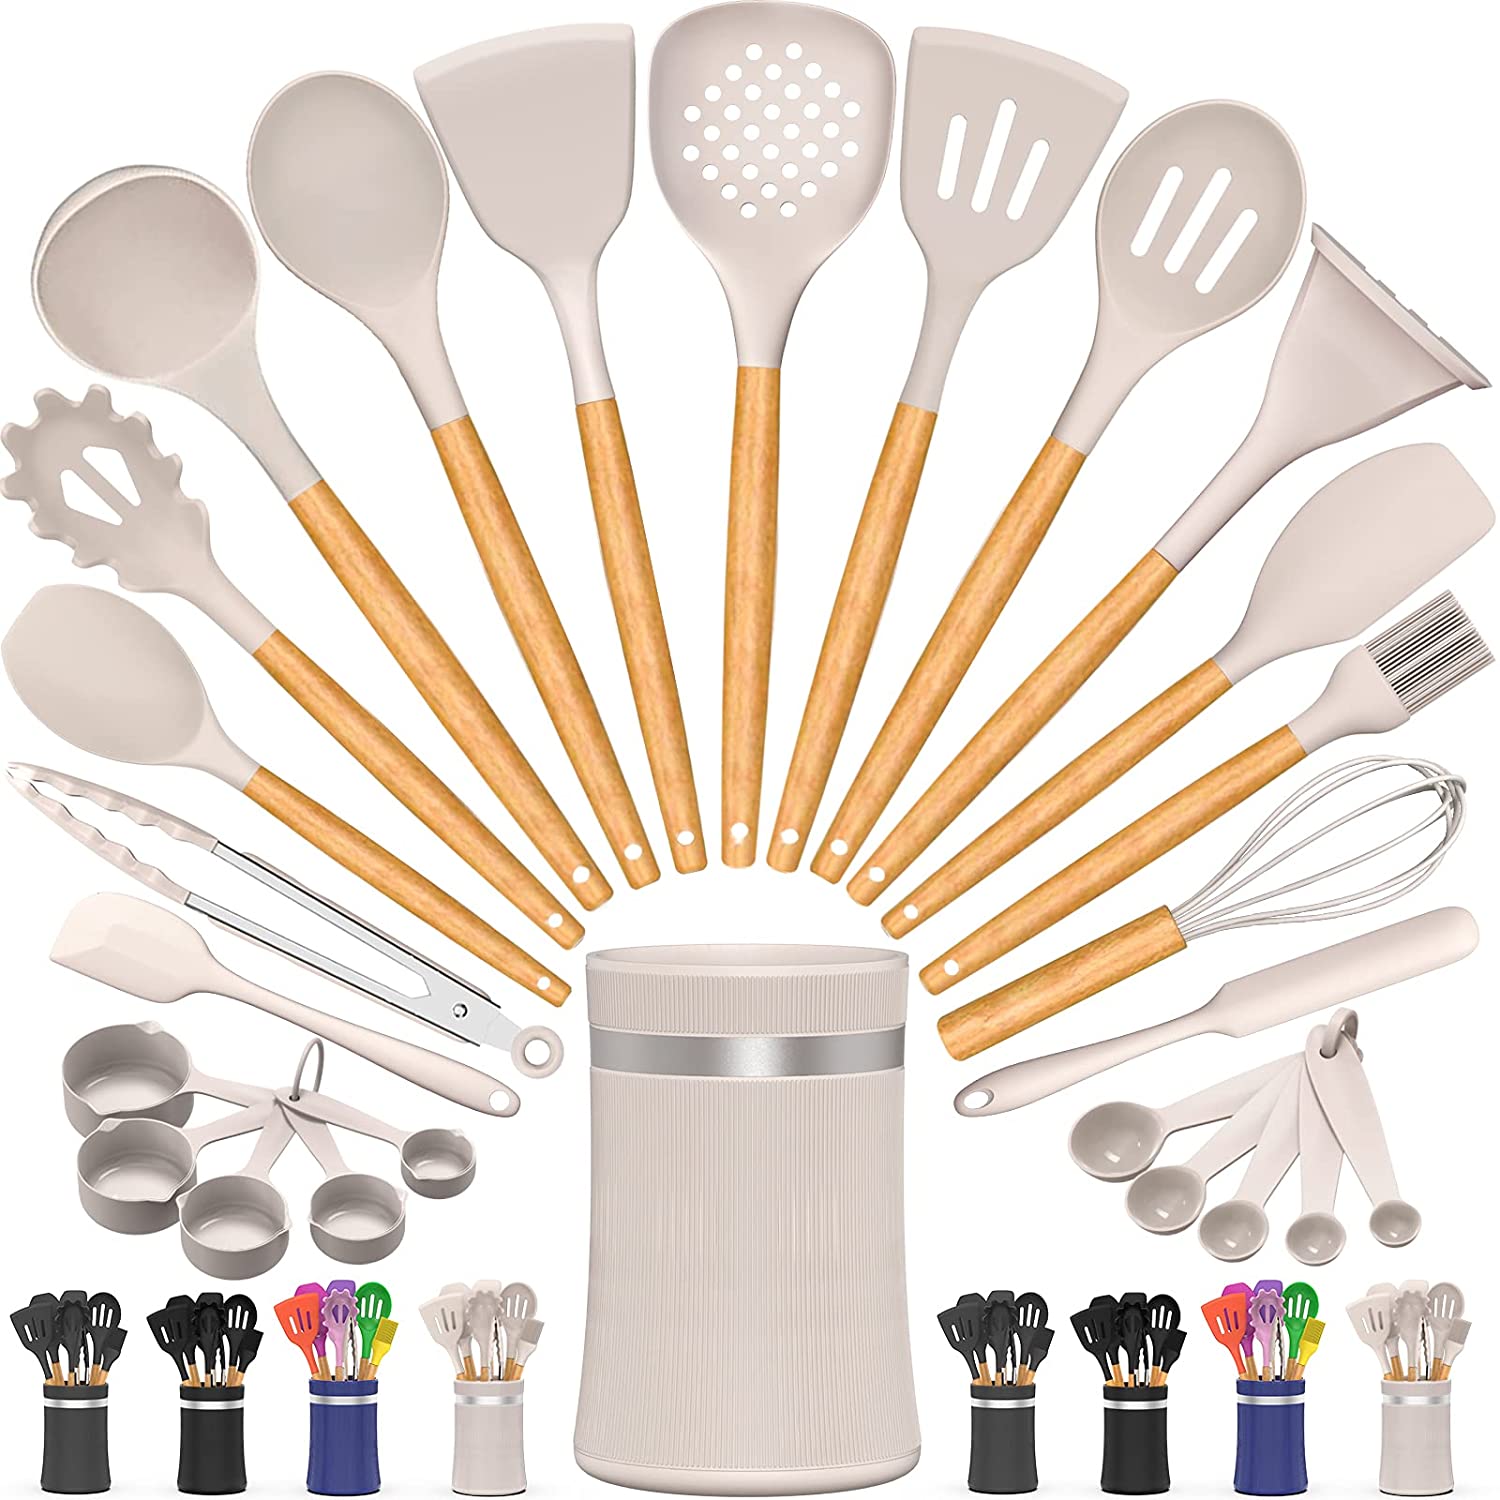 Kitchen utensil set are toprated products Best Fit for your kitchen